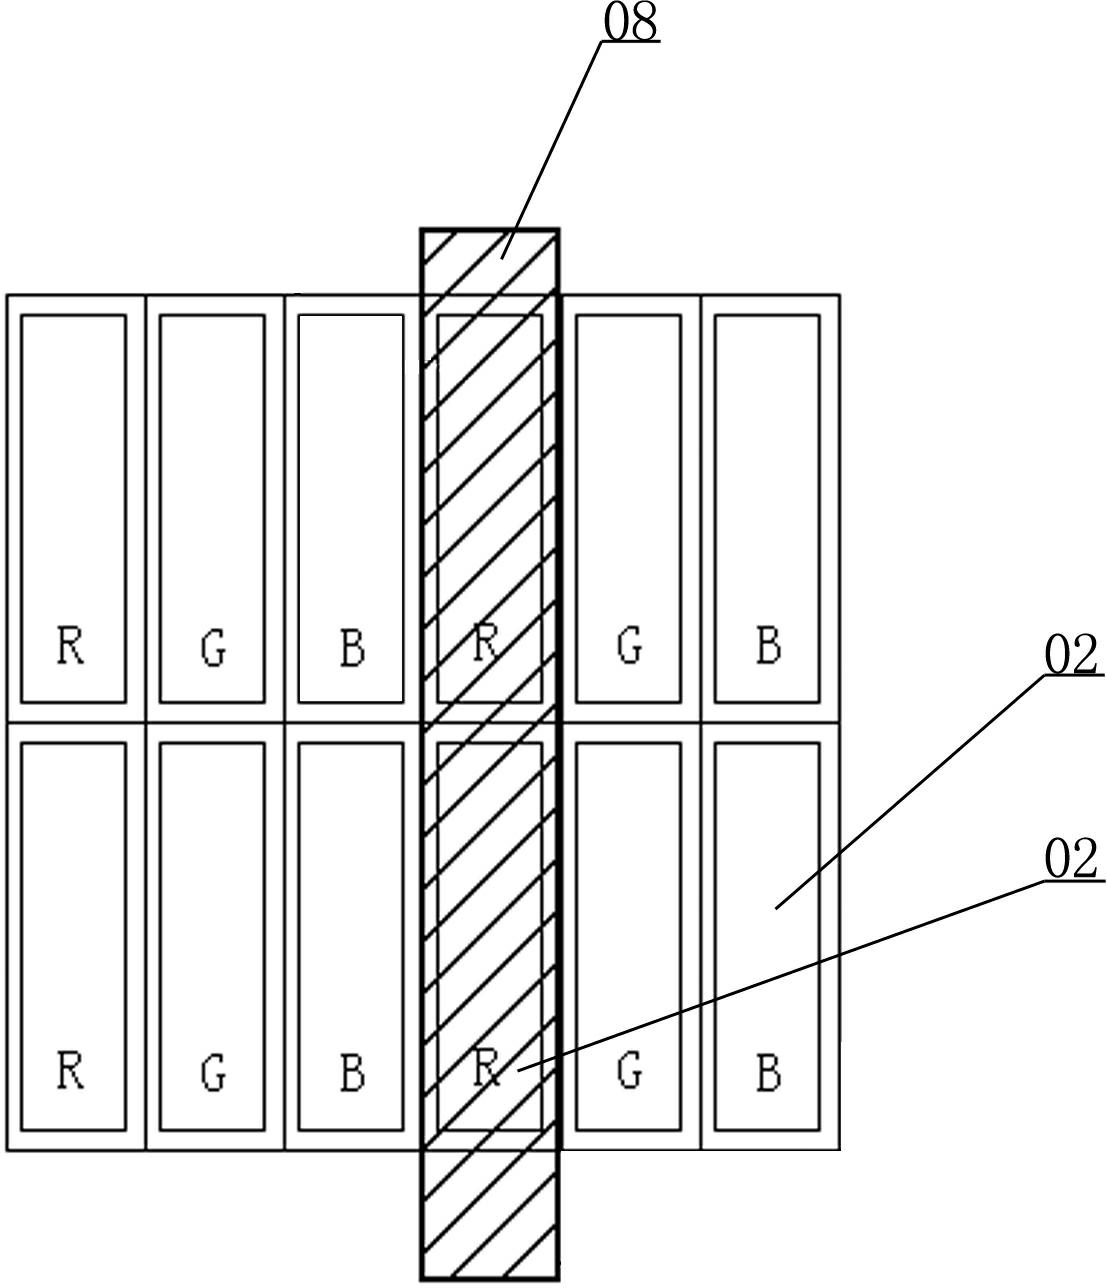 Electrode bridging connection structure for inhibiting picture interference of capacitance type touch screen